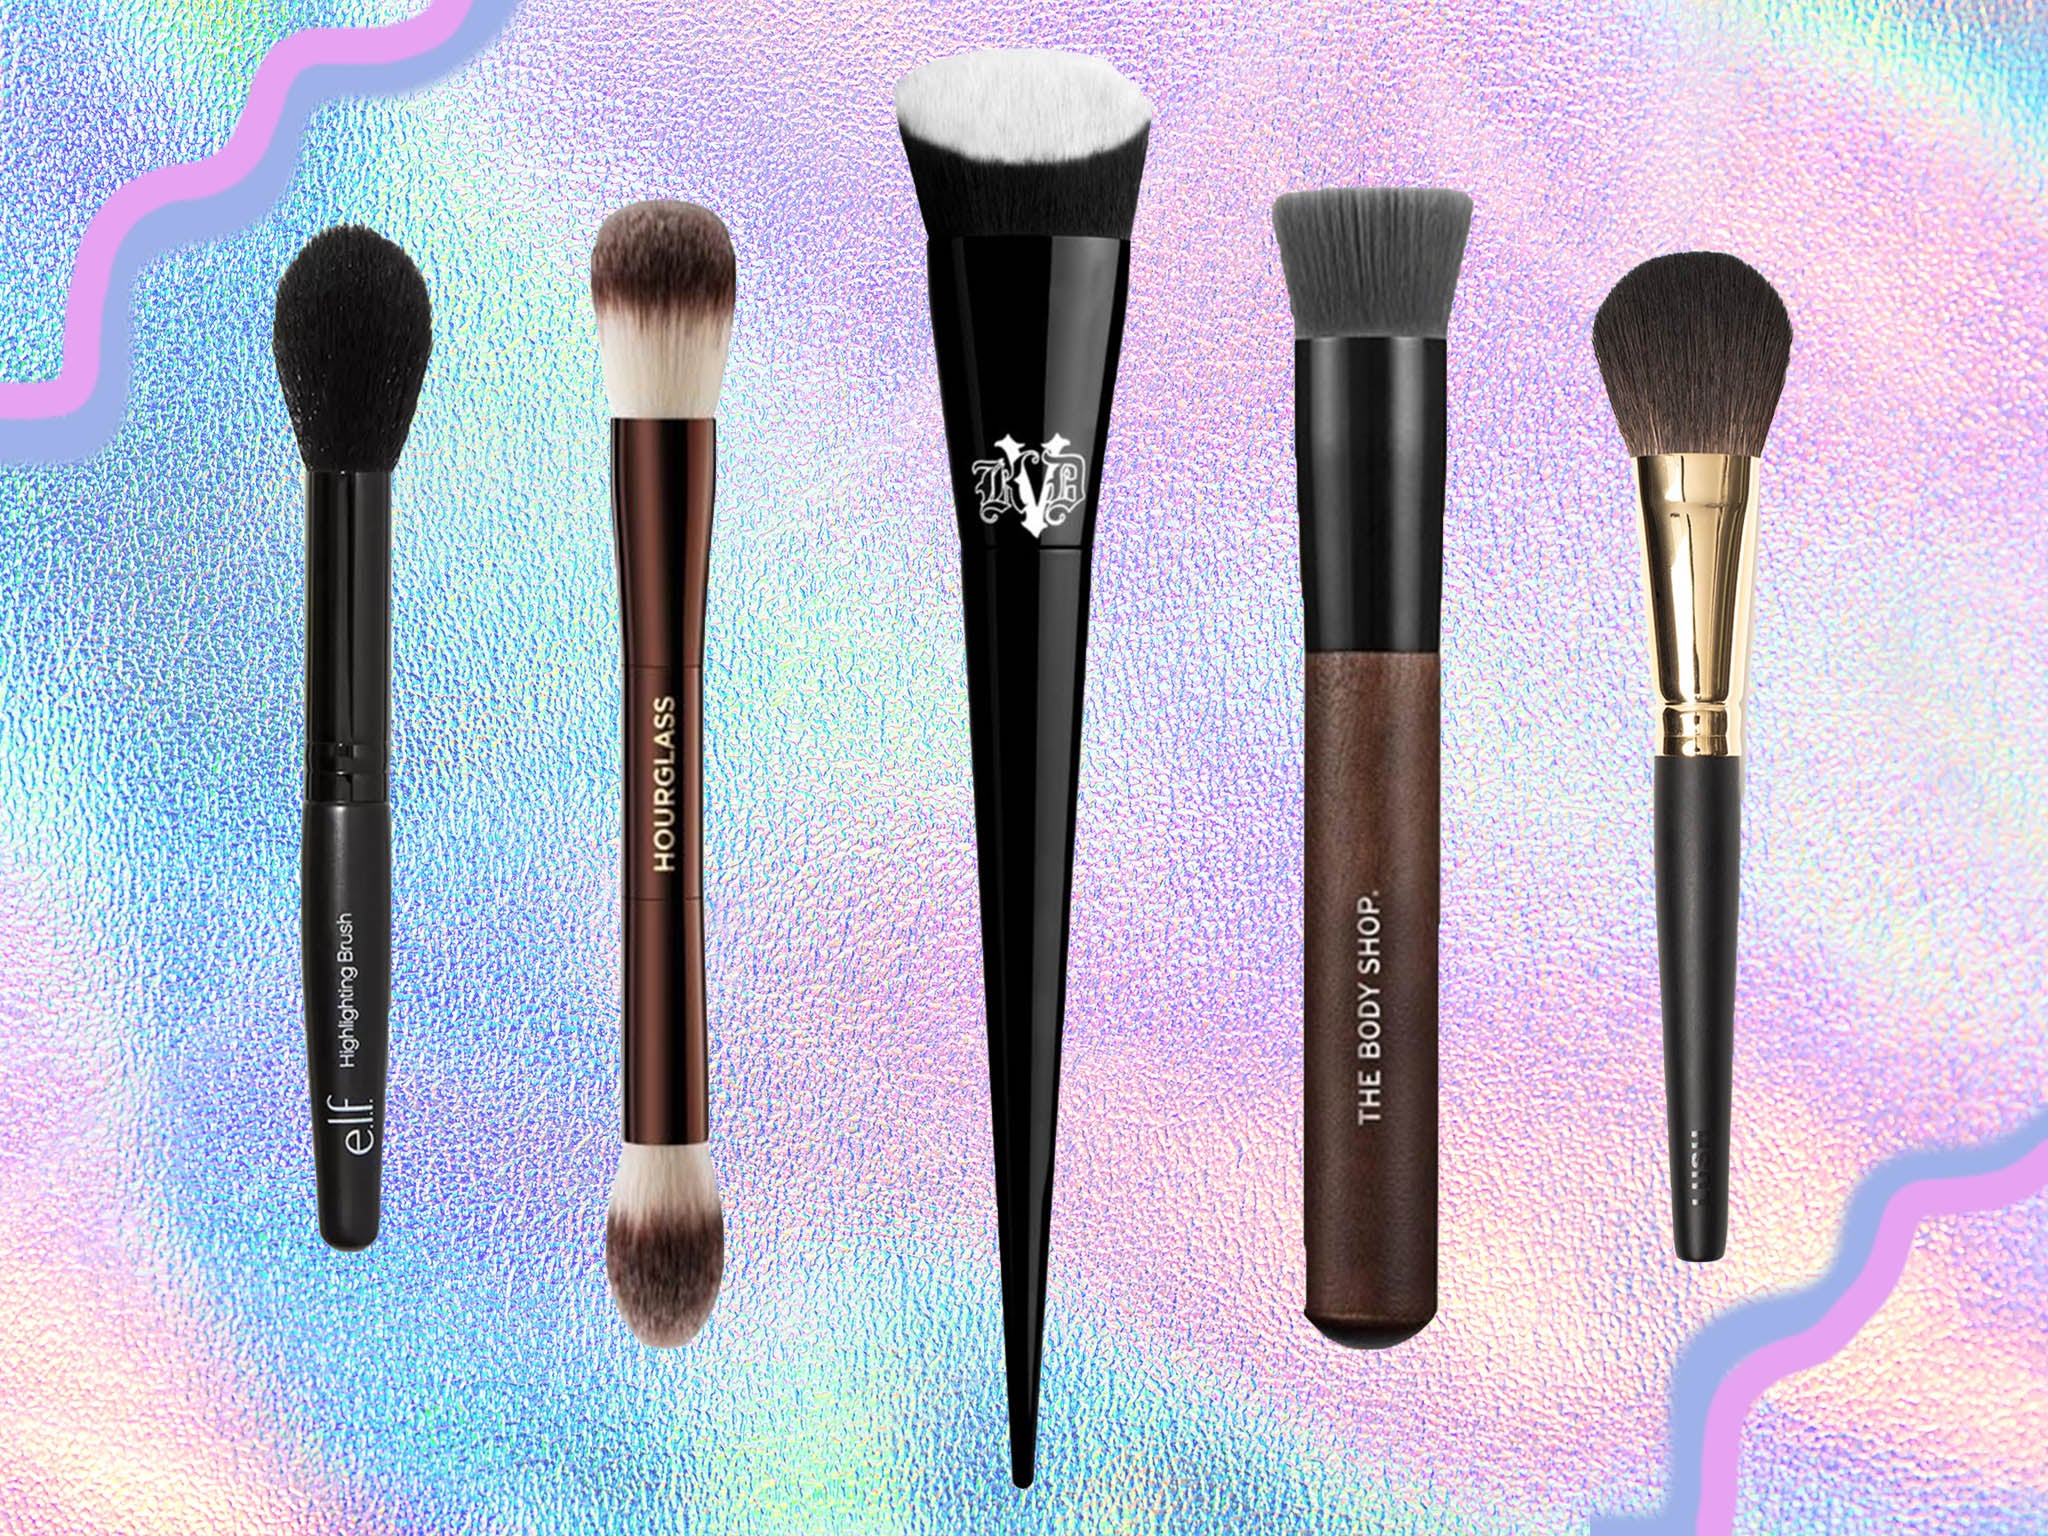 The bristles of non-vegan brushes are typically made from weasel, squirrel, mink, badger or pony hair, but we’ve found the top alternatives